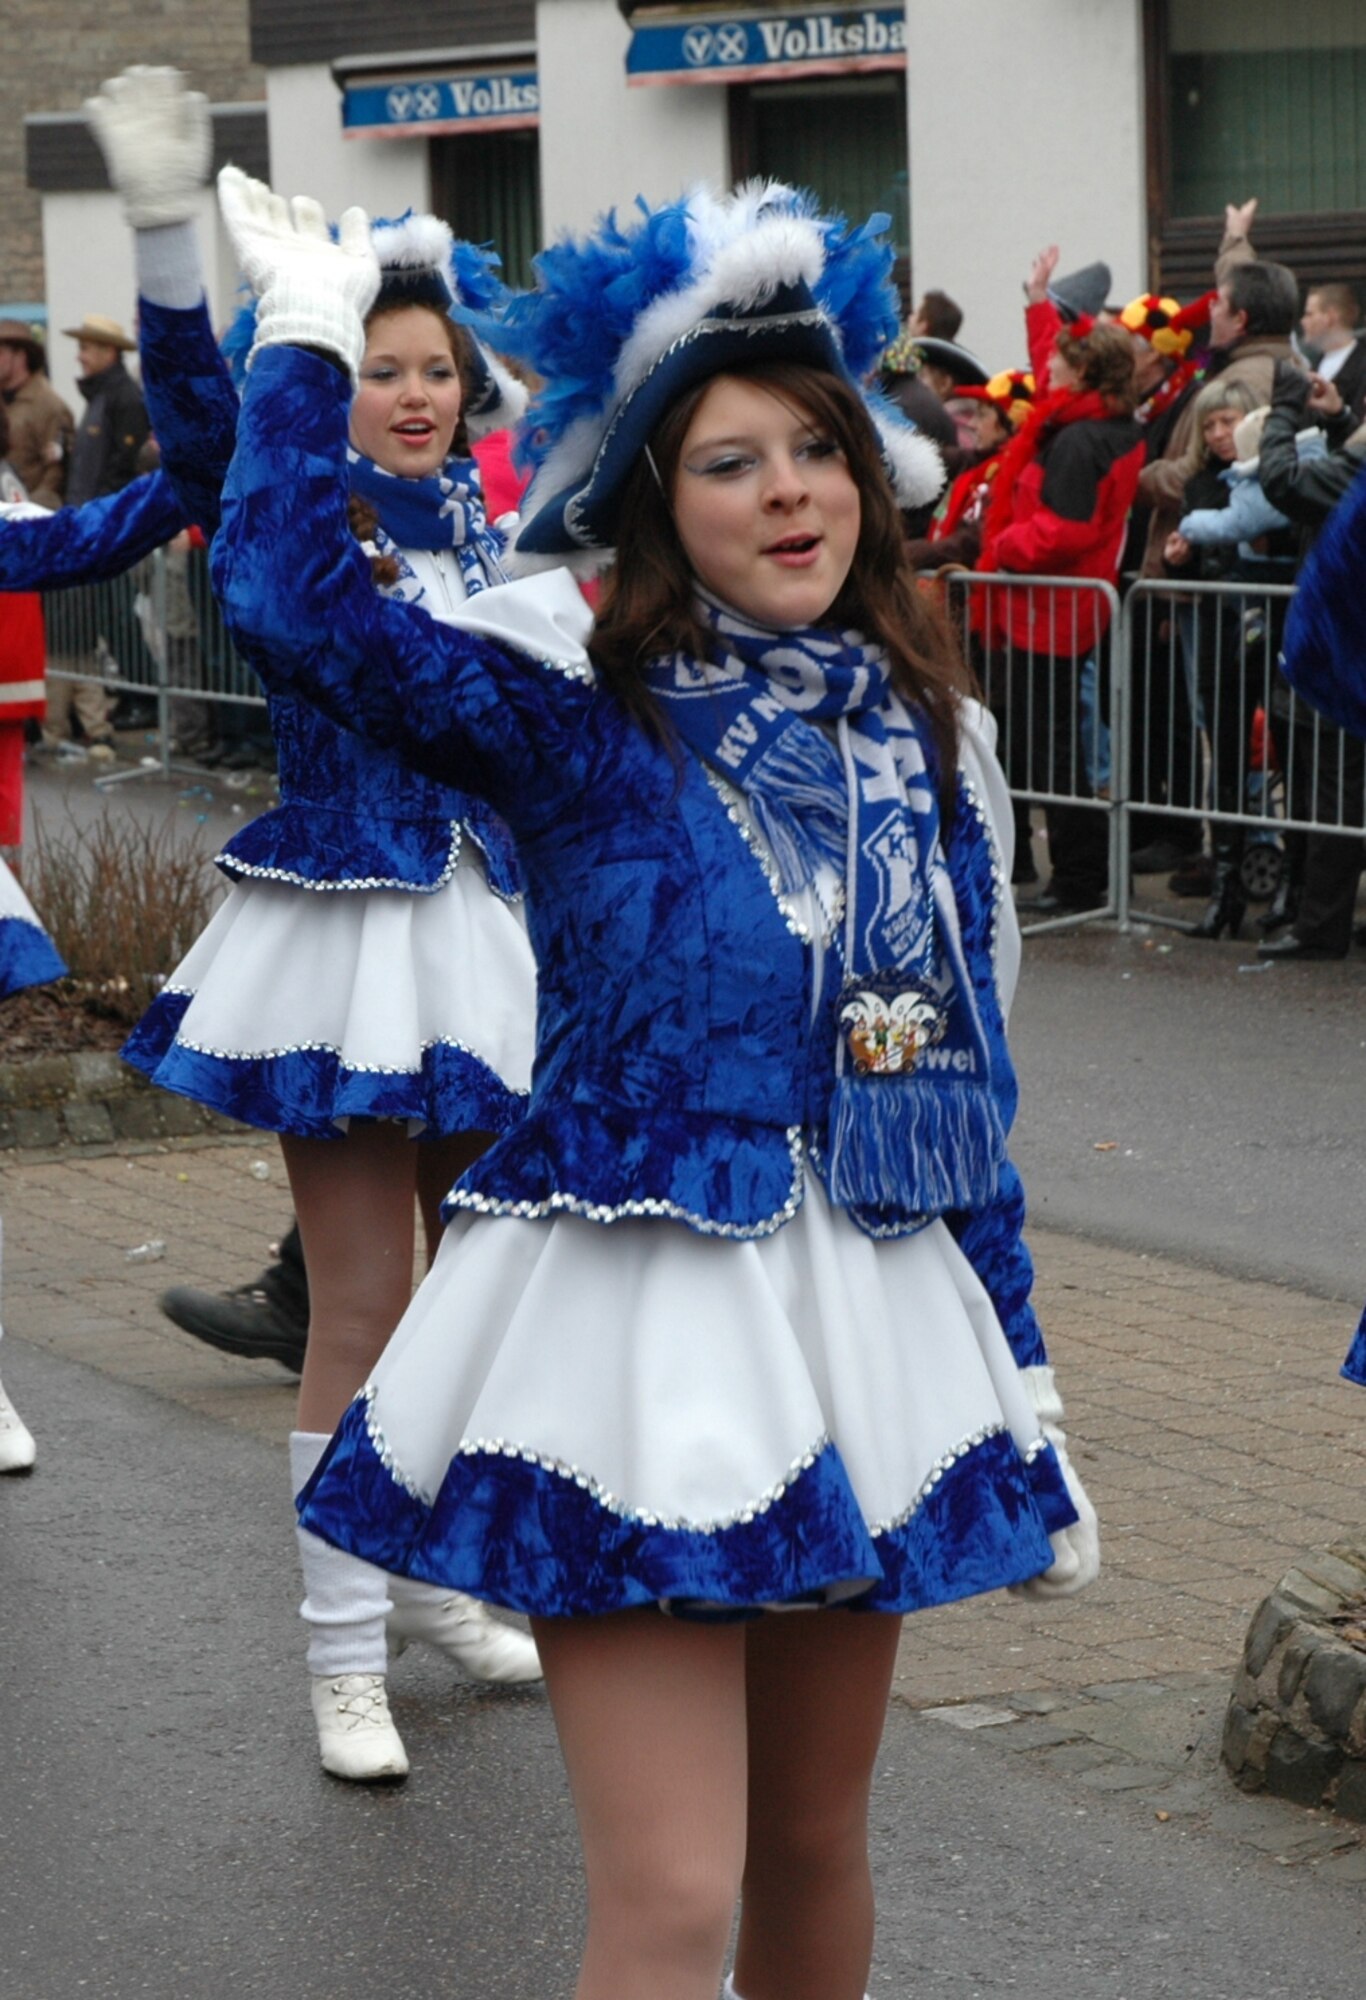 KORDEL, Germany -- In traditional blue-white outfits a group of young fanfare “Funkengarde” female dancers participated in a fashing parade in Kordel Feb. 22, 2009. The Kordel parade was the second largest parade in the Trier area, attracting close to a thousand visitors from around the area. (U.S. Air Force photo by Iris Reiff)